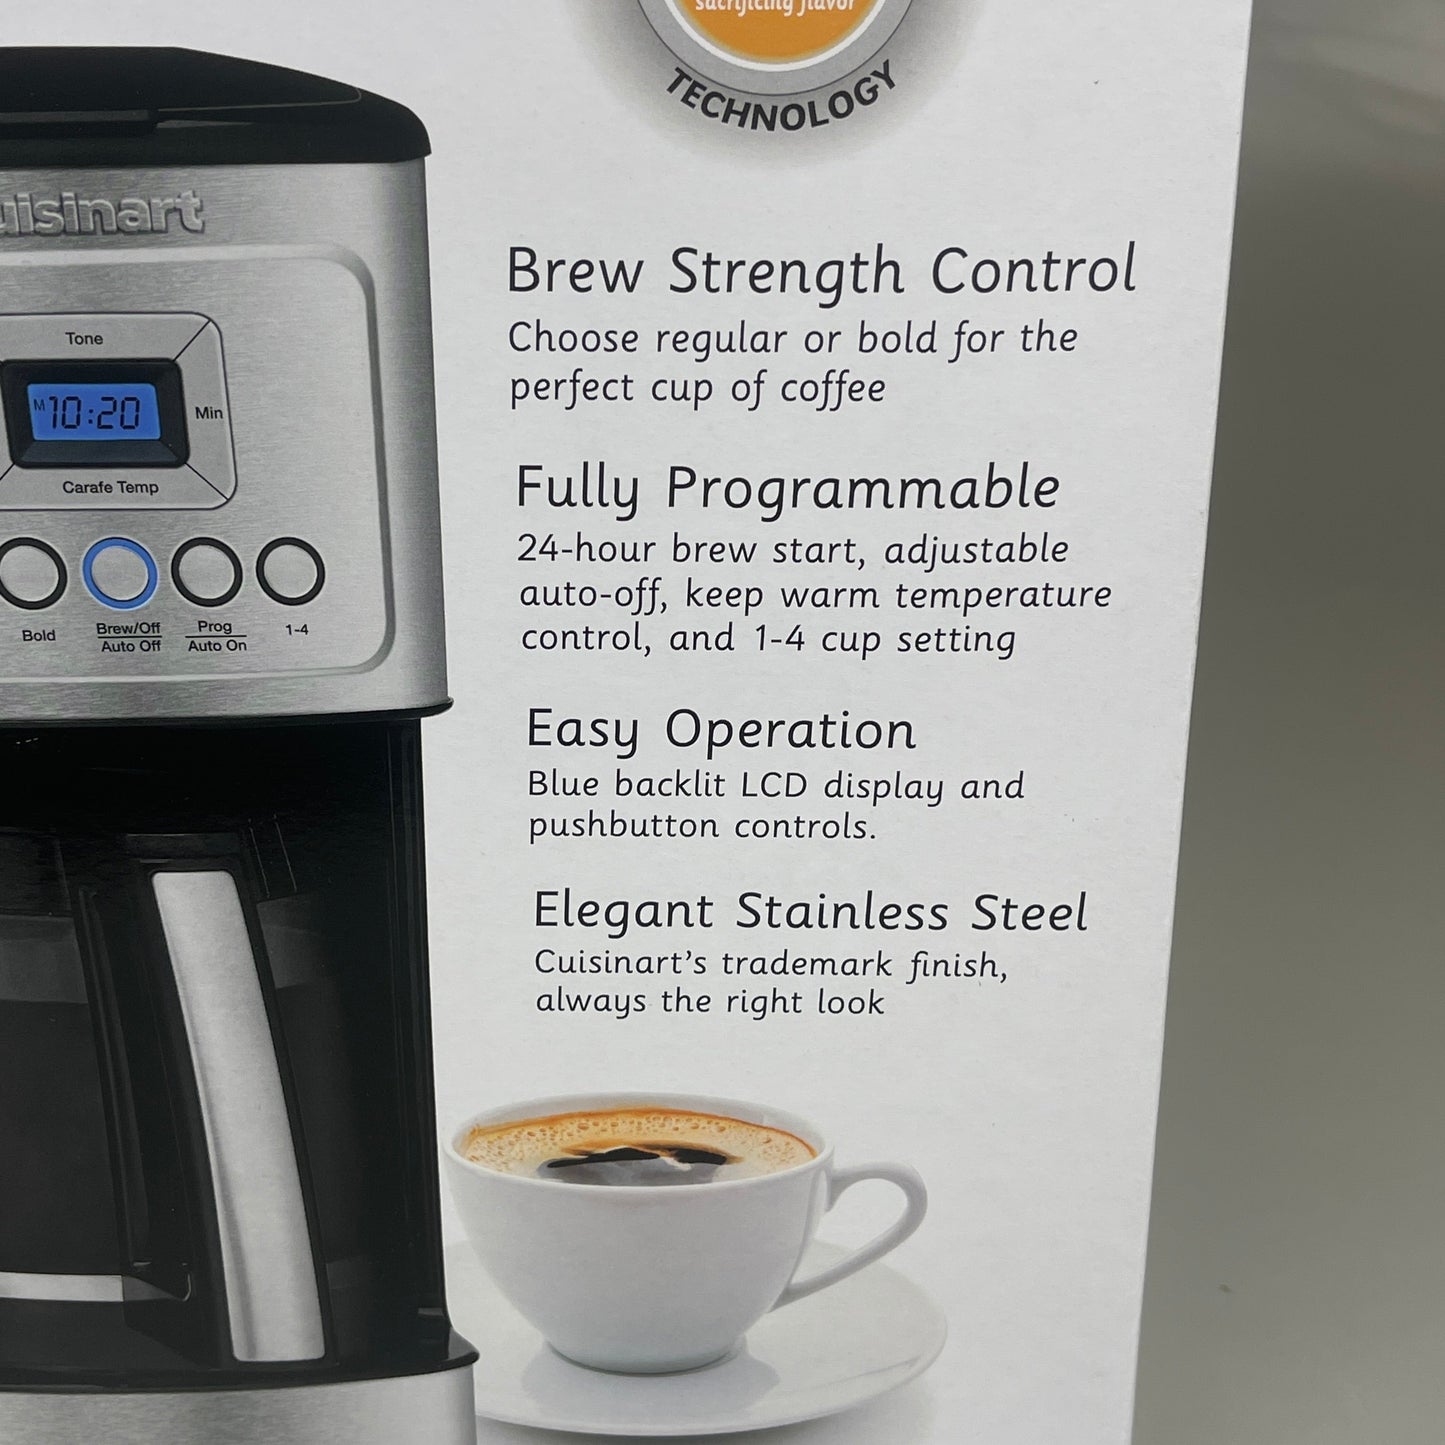 CUISINART (14 CUP) Programmable Coffee Maker Stainless Steel DCC-3200P1